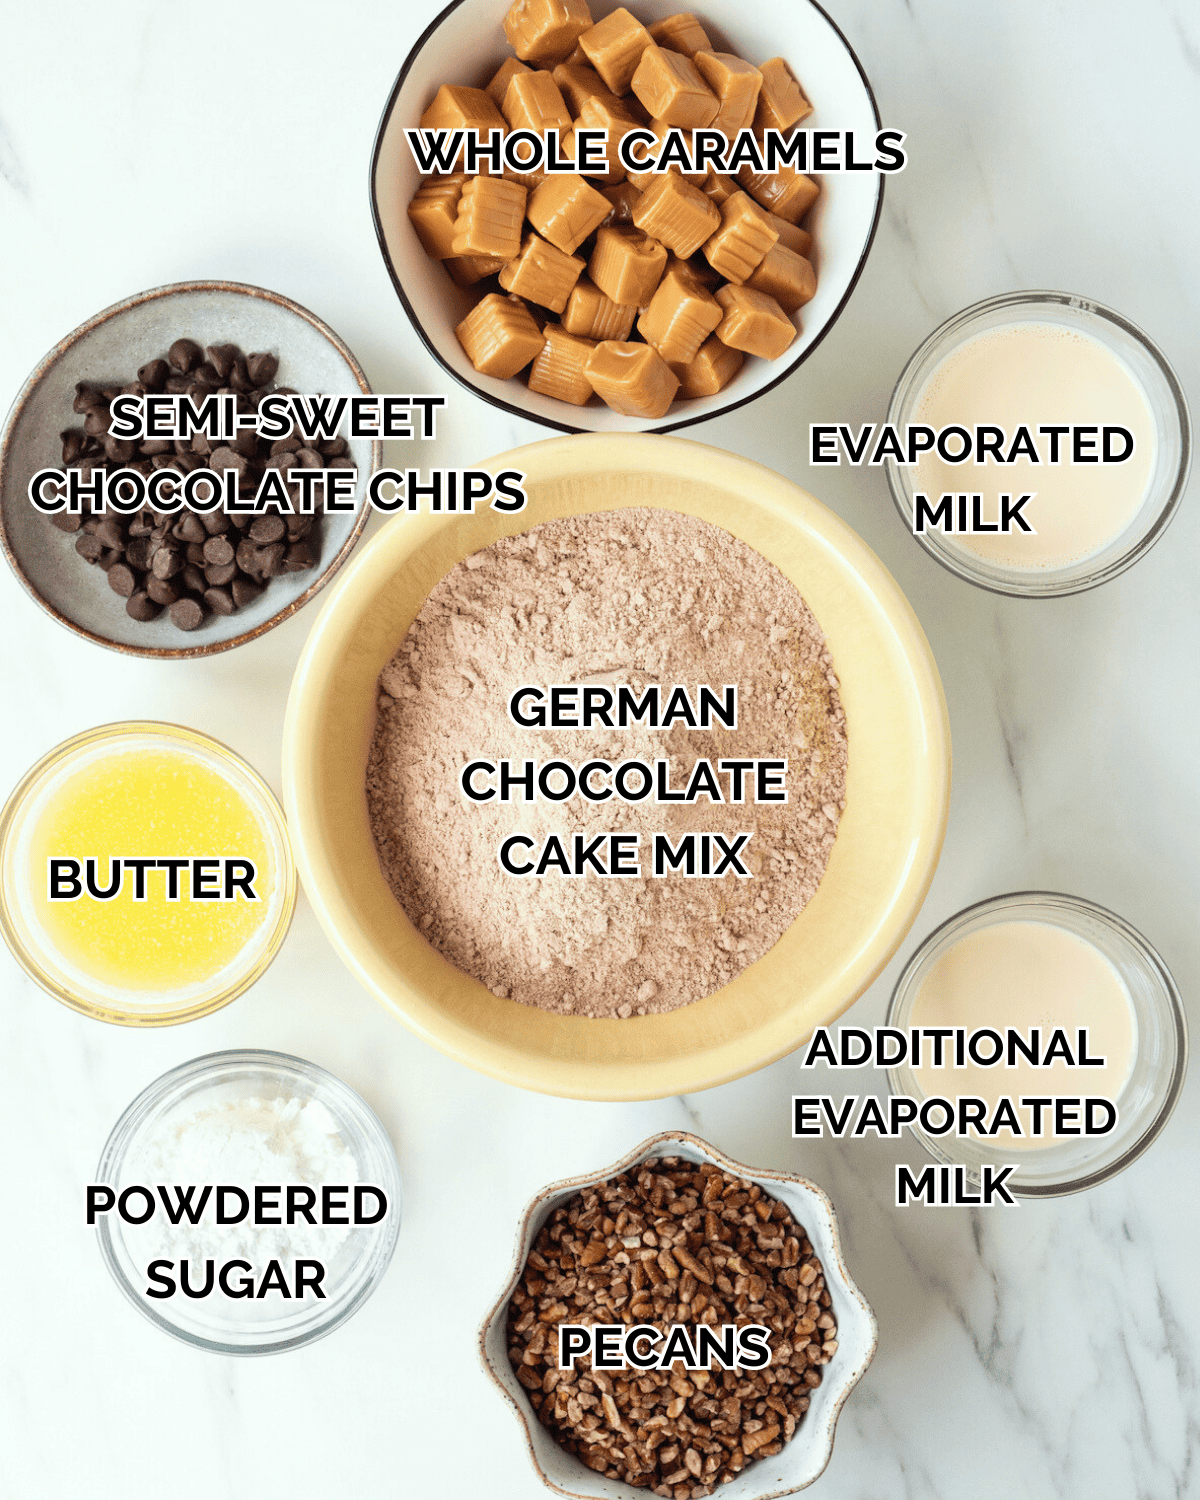 All of the ingredients sit in individual prep bowls.  Ingredients consist of whole caramels, evaporated milk, chocolate chips, melted butter, powdered sugar, pecans, and evaporated milk.